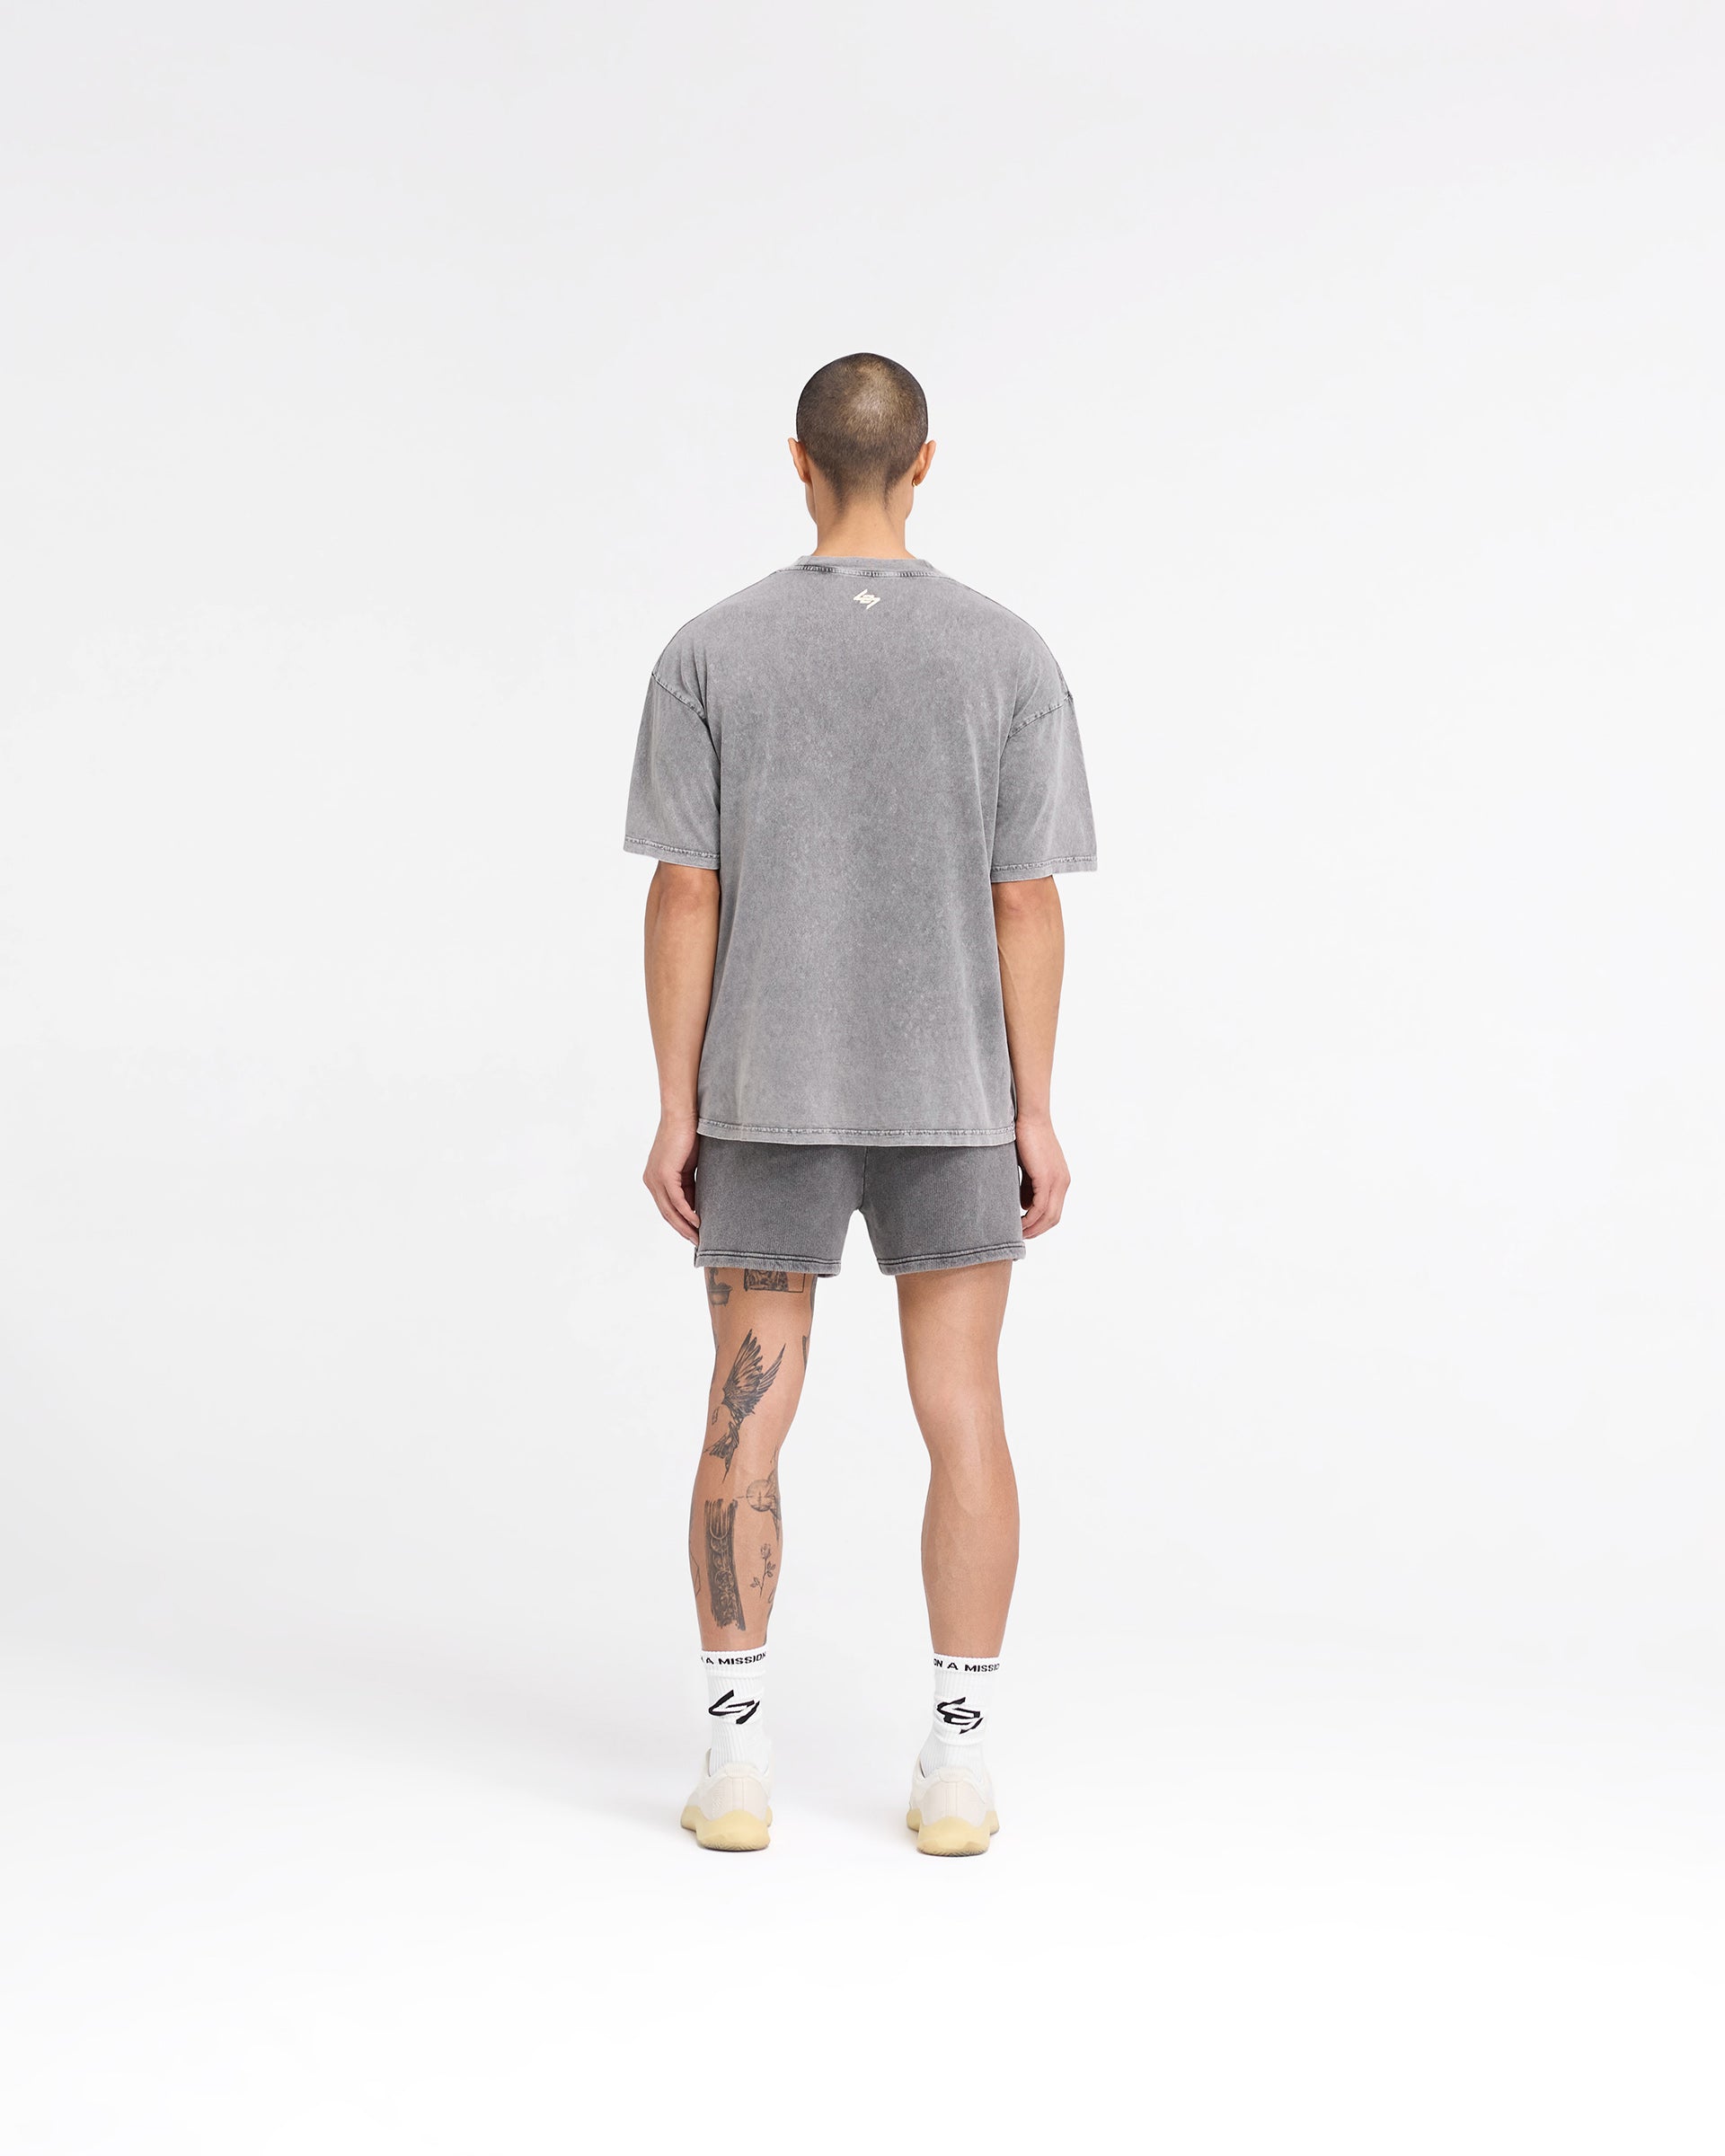 247 Vs The World Jersey Shorts - Pewter